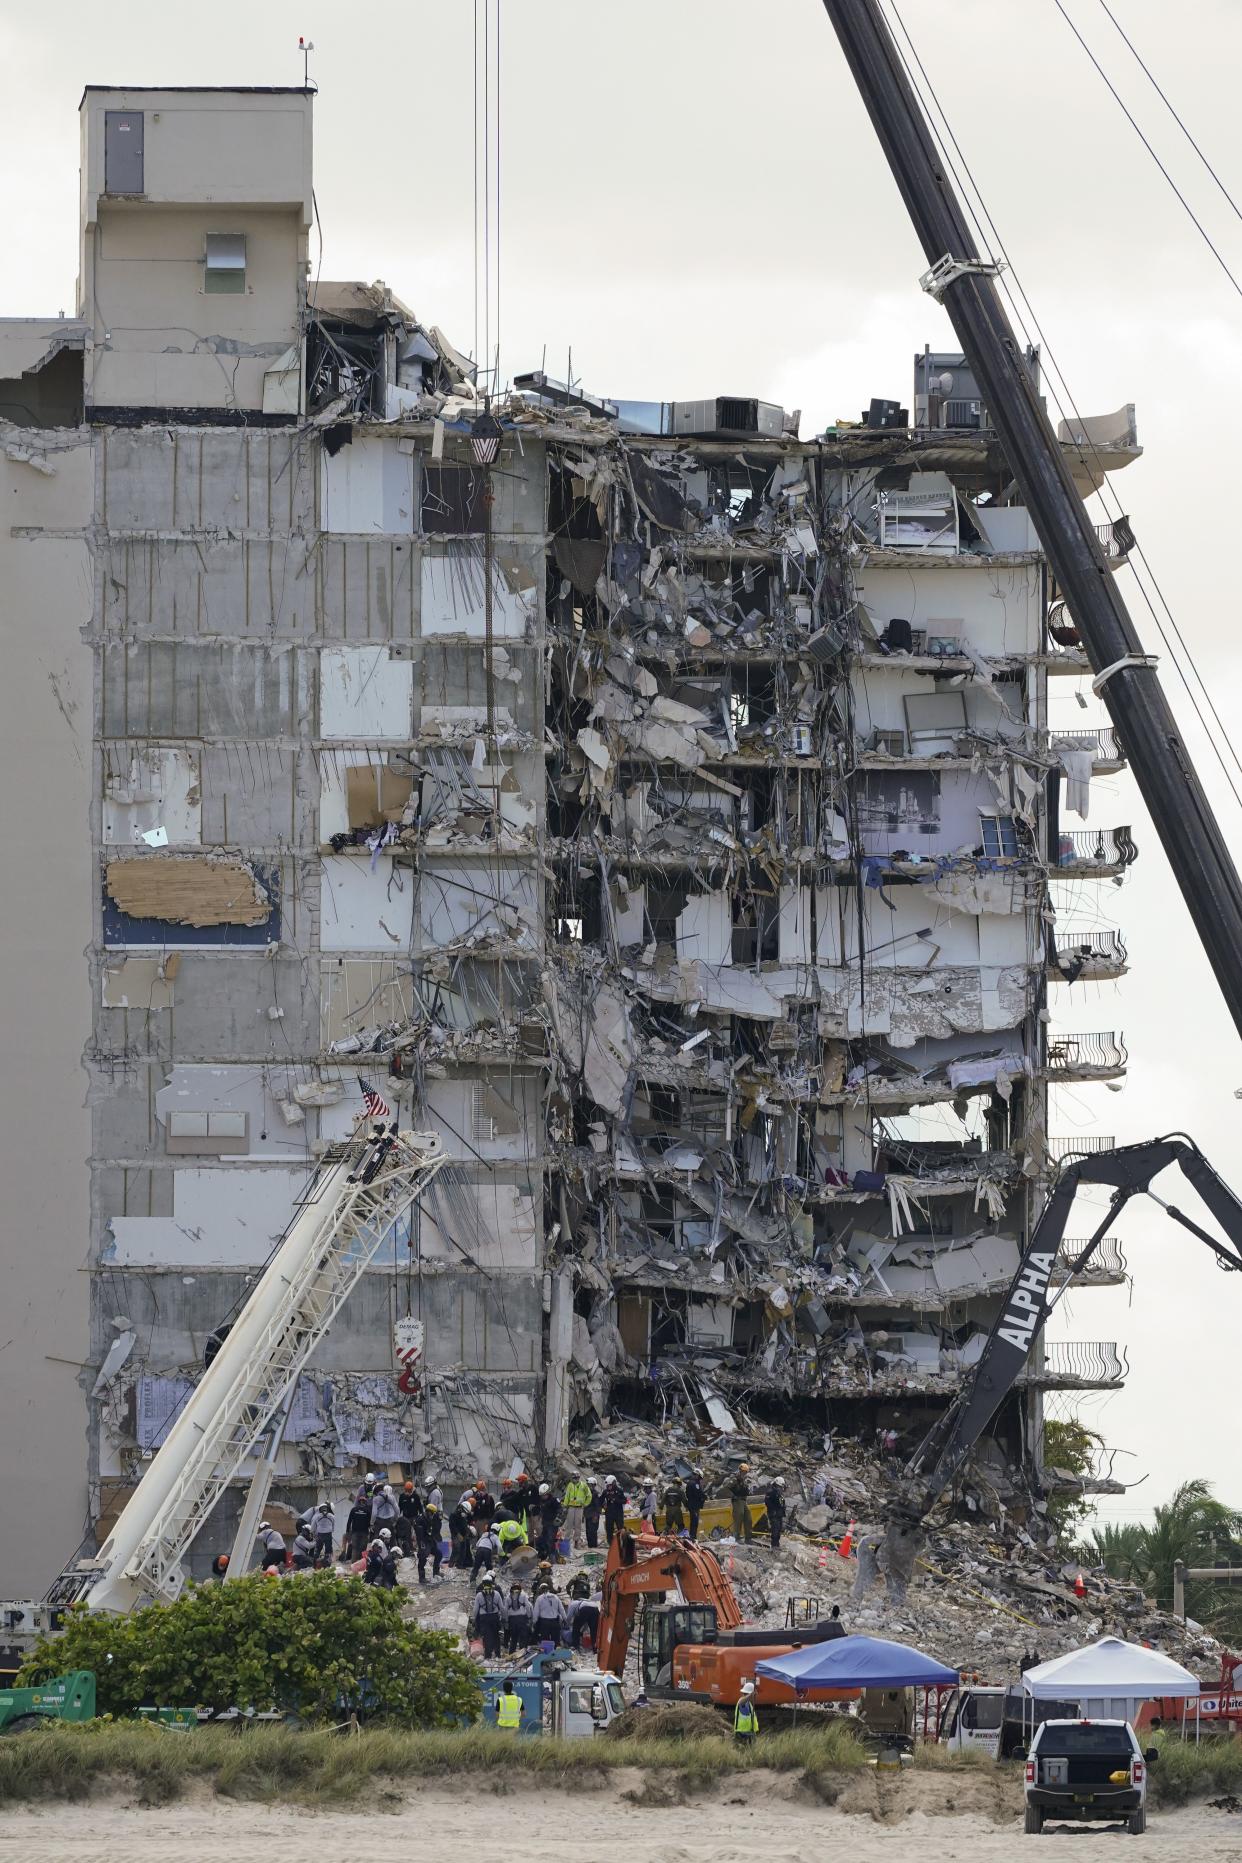 Search and rescue personnel work atop the rubble at the Champlain Towers South condo building, where scores of victims remain missing more than a week after it partially collapsed, Friday, July 2, 2021, in Surfside, Fla.